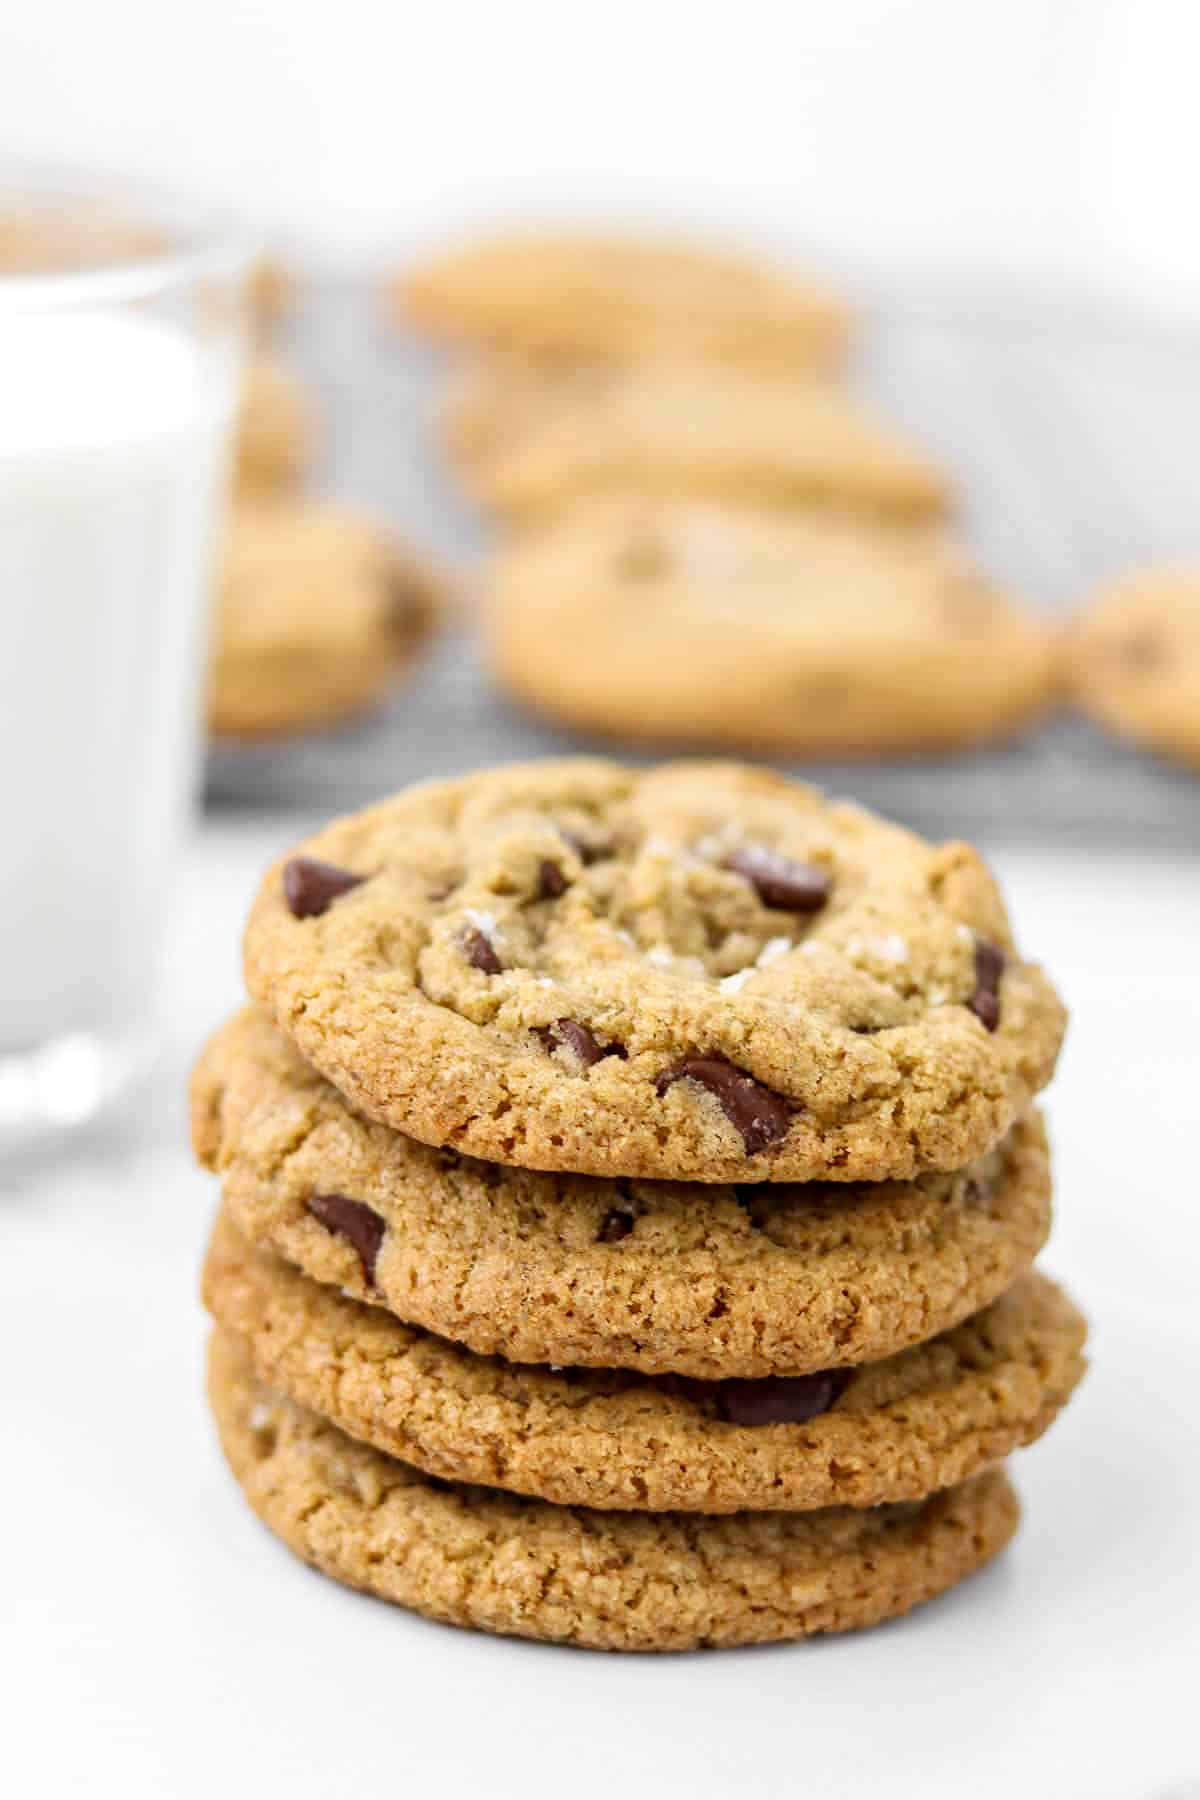 Stack of chocolate cookies next to a glass of milk.